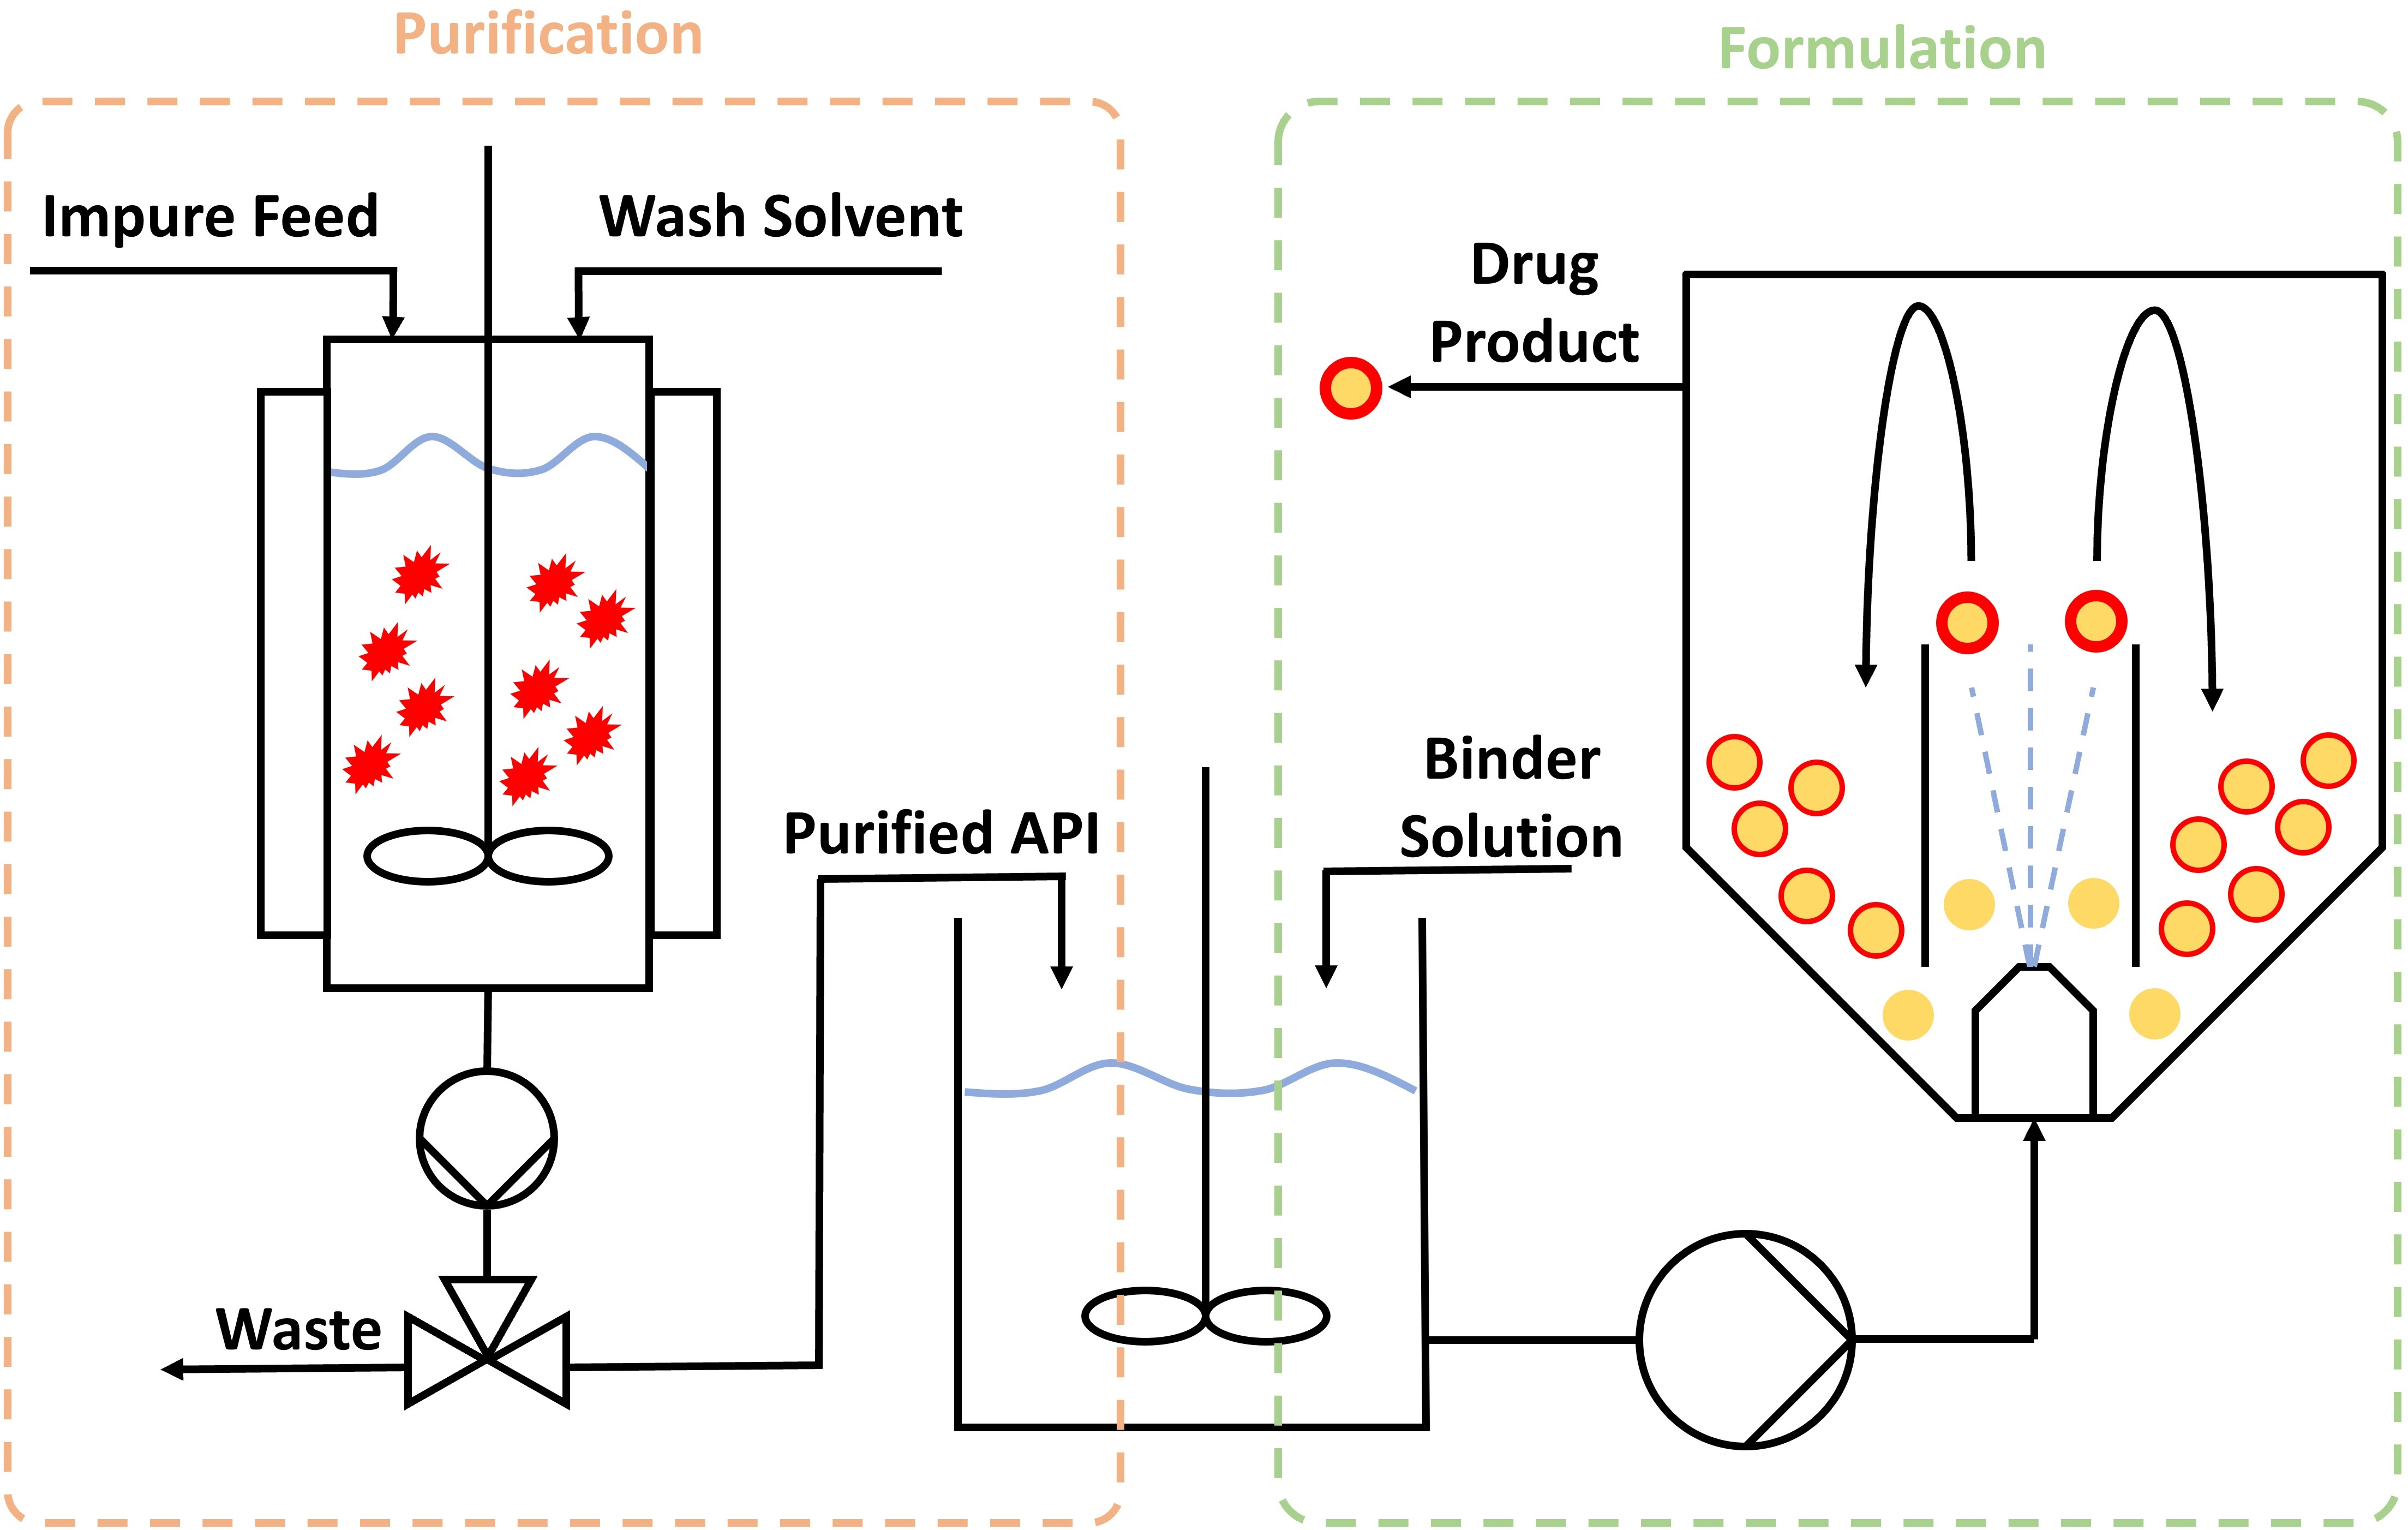 Integrated Purification and Formulation of an Active Pharmaceutical Ingredient via Agitated Bed Crystallization and Fluidized Bed Processing